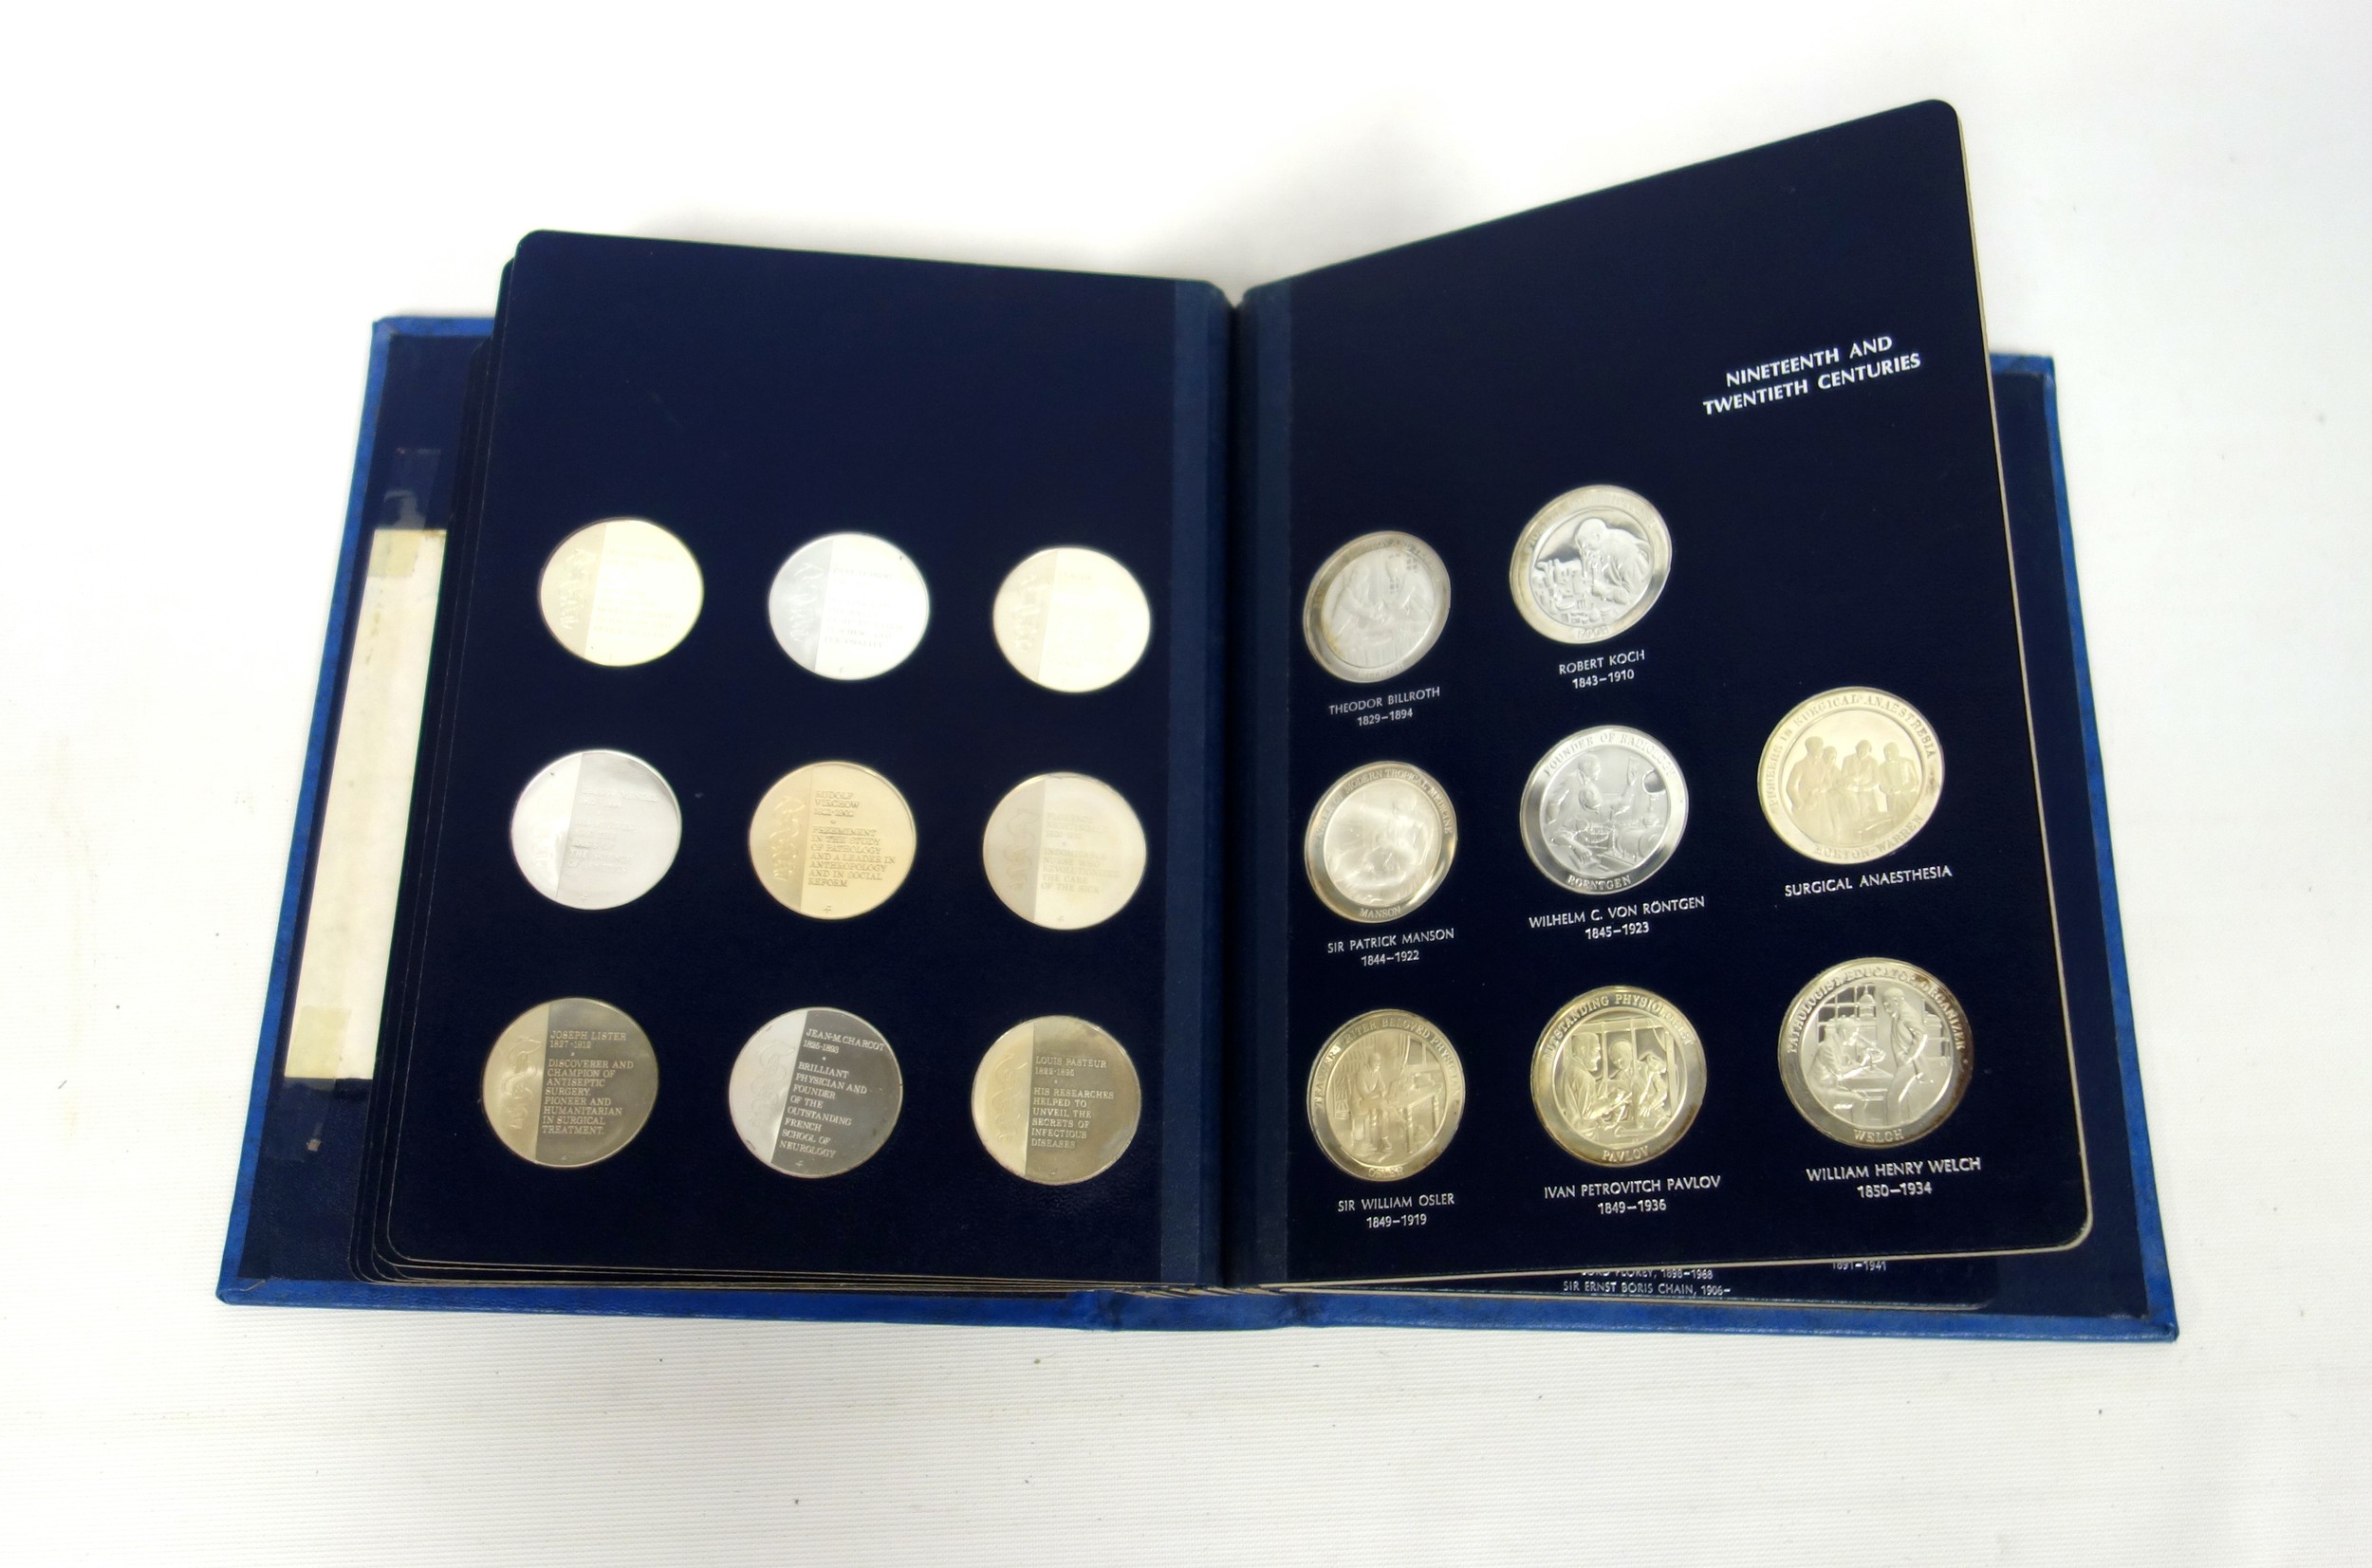 Systema Sciences Ltd. set of 66 Medallic History of Medicine silver special mint finish medals, - Image 9 of 11